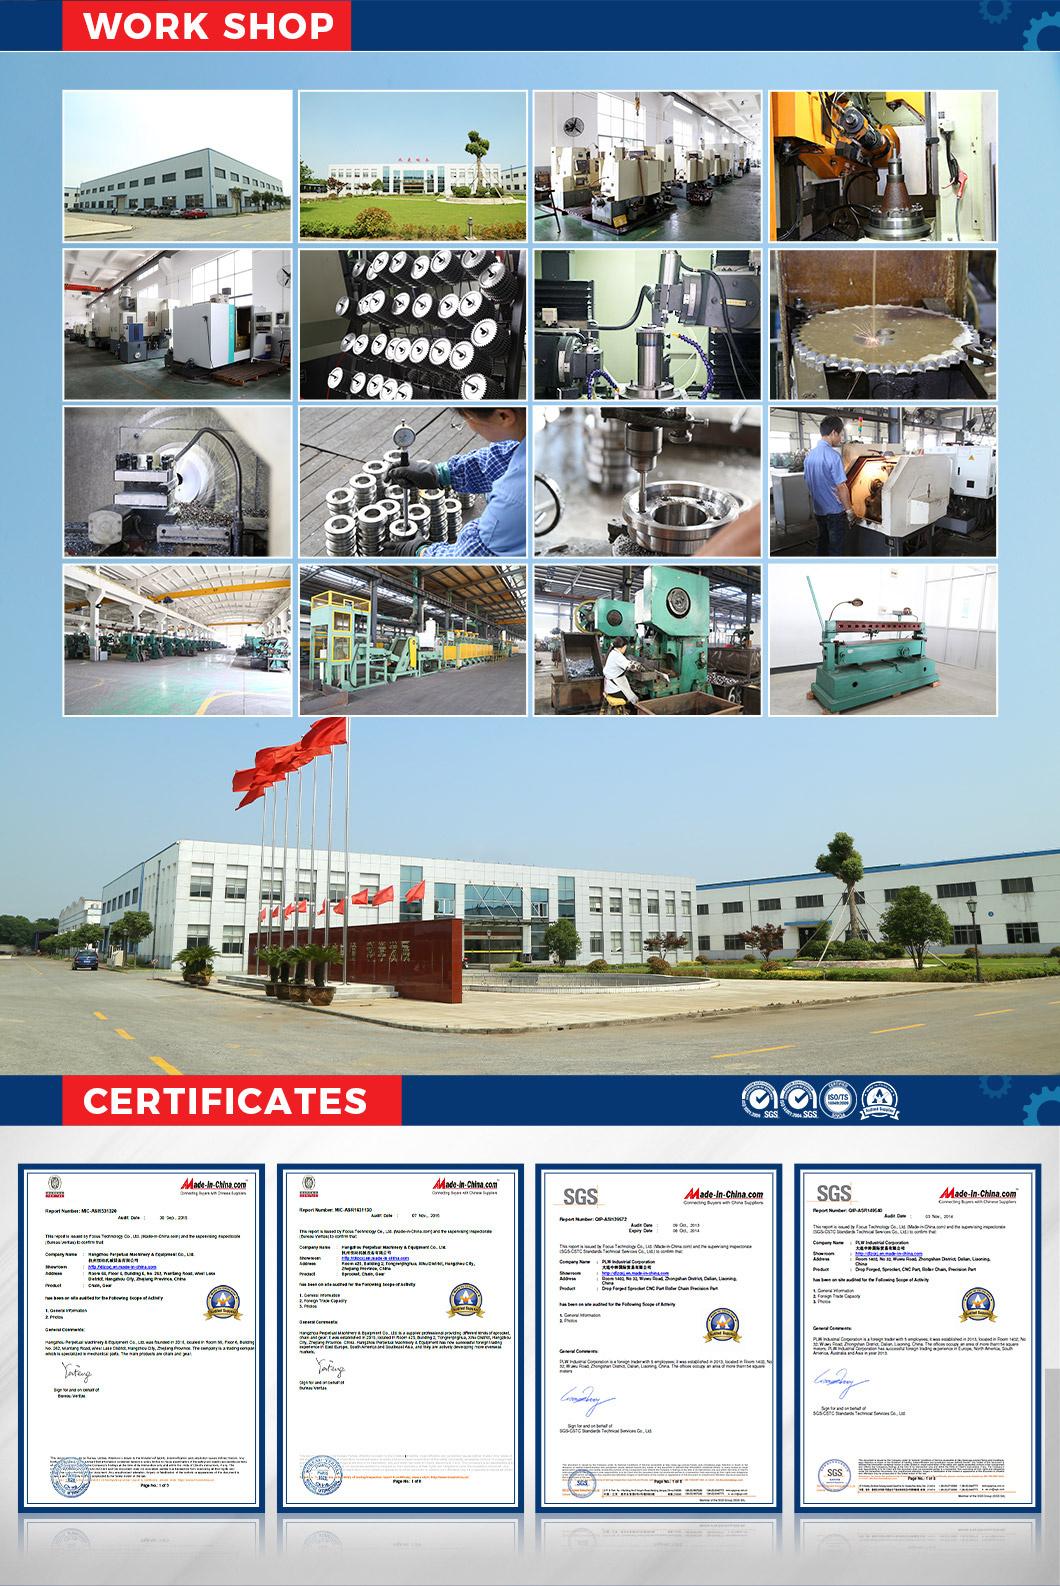 S Type Industrial Transmission Conveyor Roller Agricultural Chain with Attachment